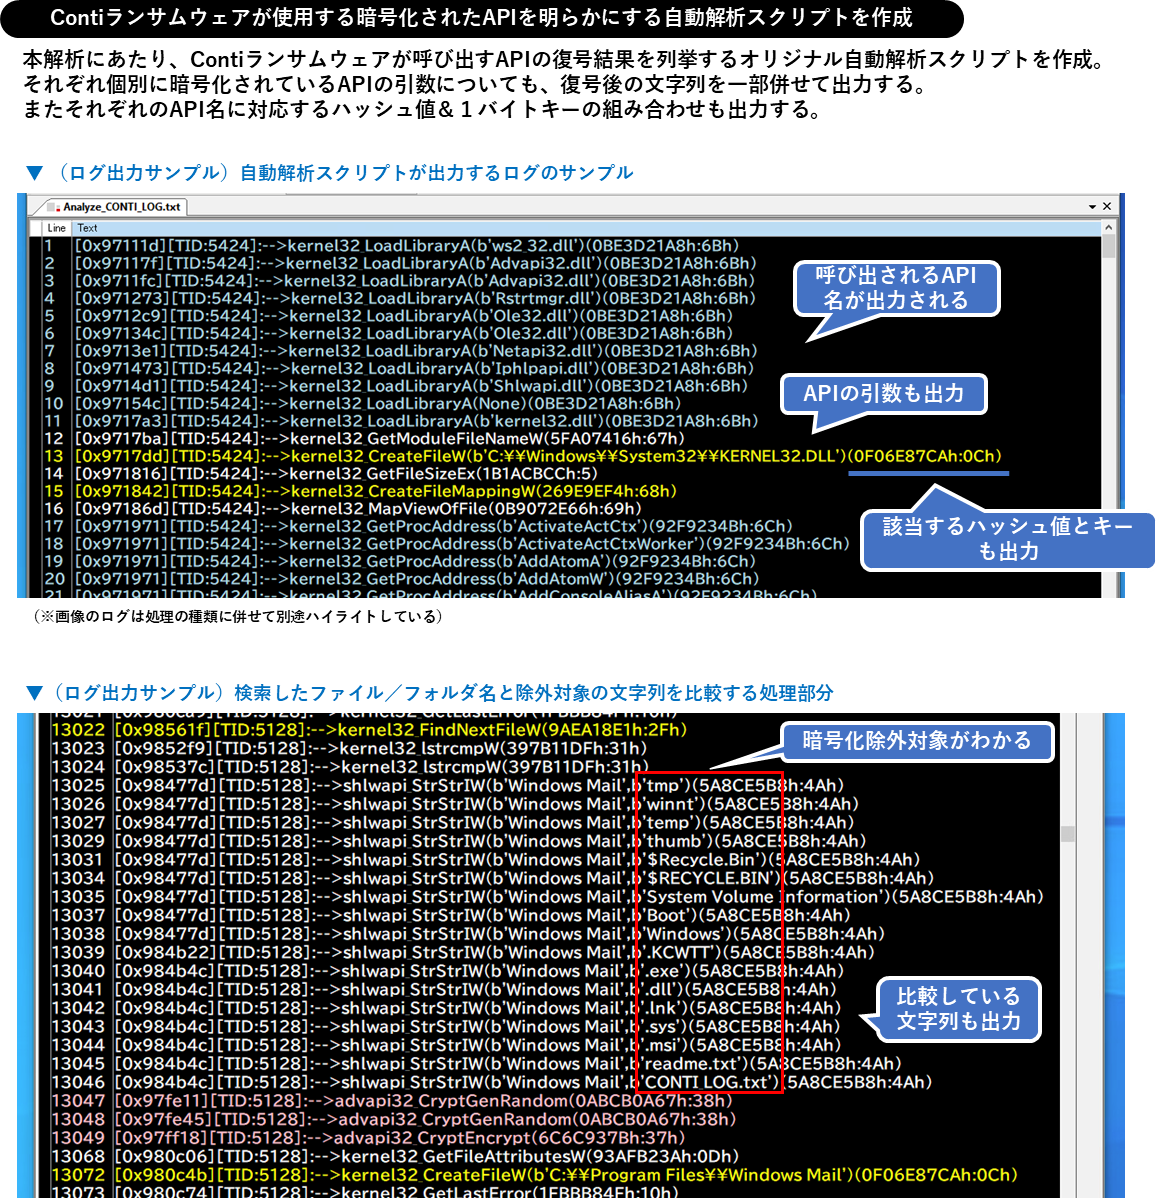 conti-ransomware_fig029.png